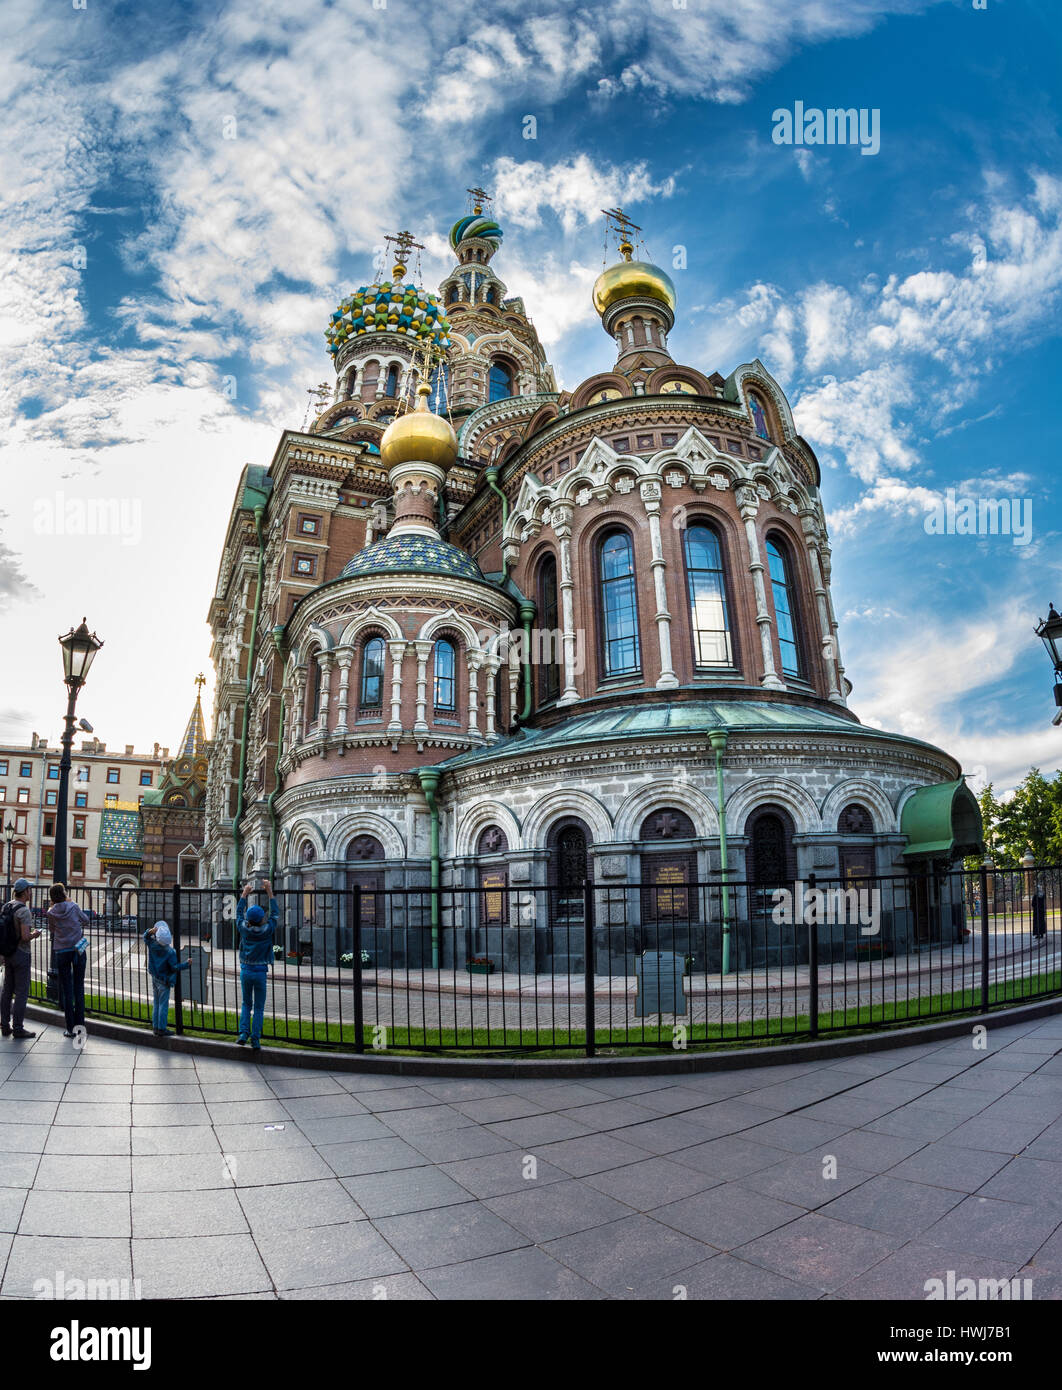 ST. PETERSBURG, RUSSIA - JULY 11, 2016: Church of the Savior on Blood against bright sun with lens flare in Saint-Petersburg, Russia. One of the main  Stock Photo